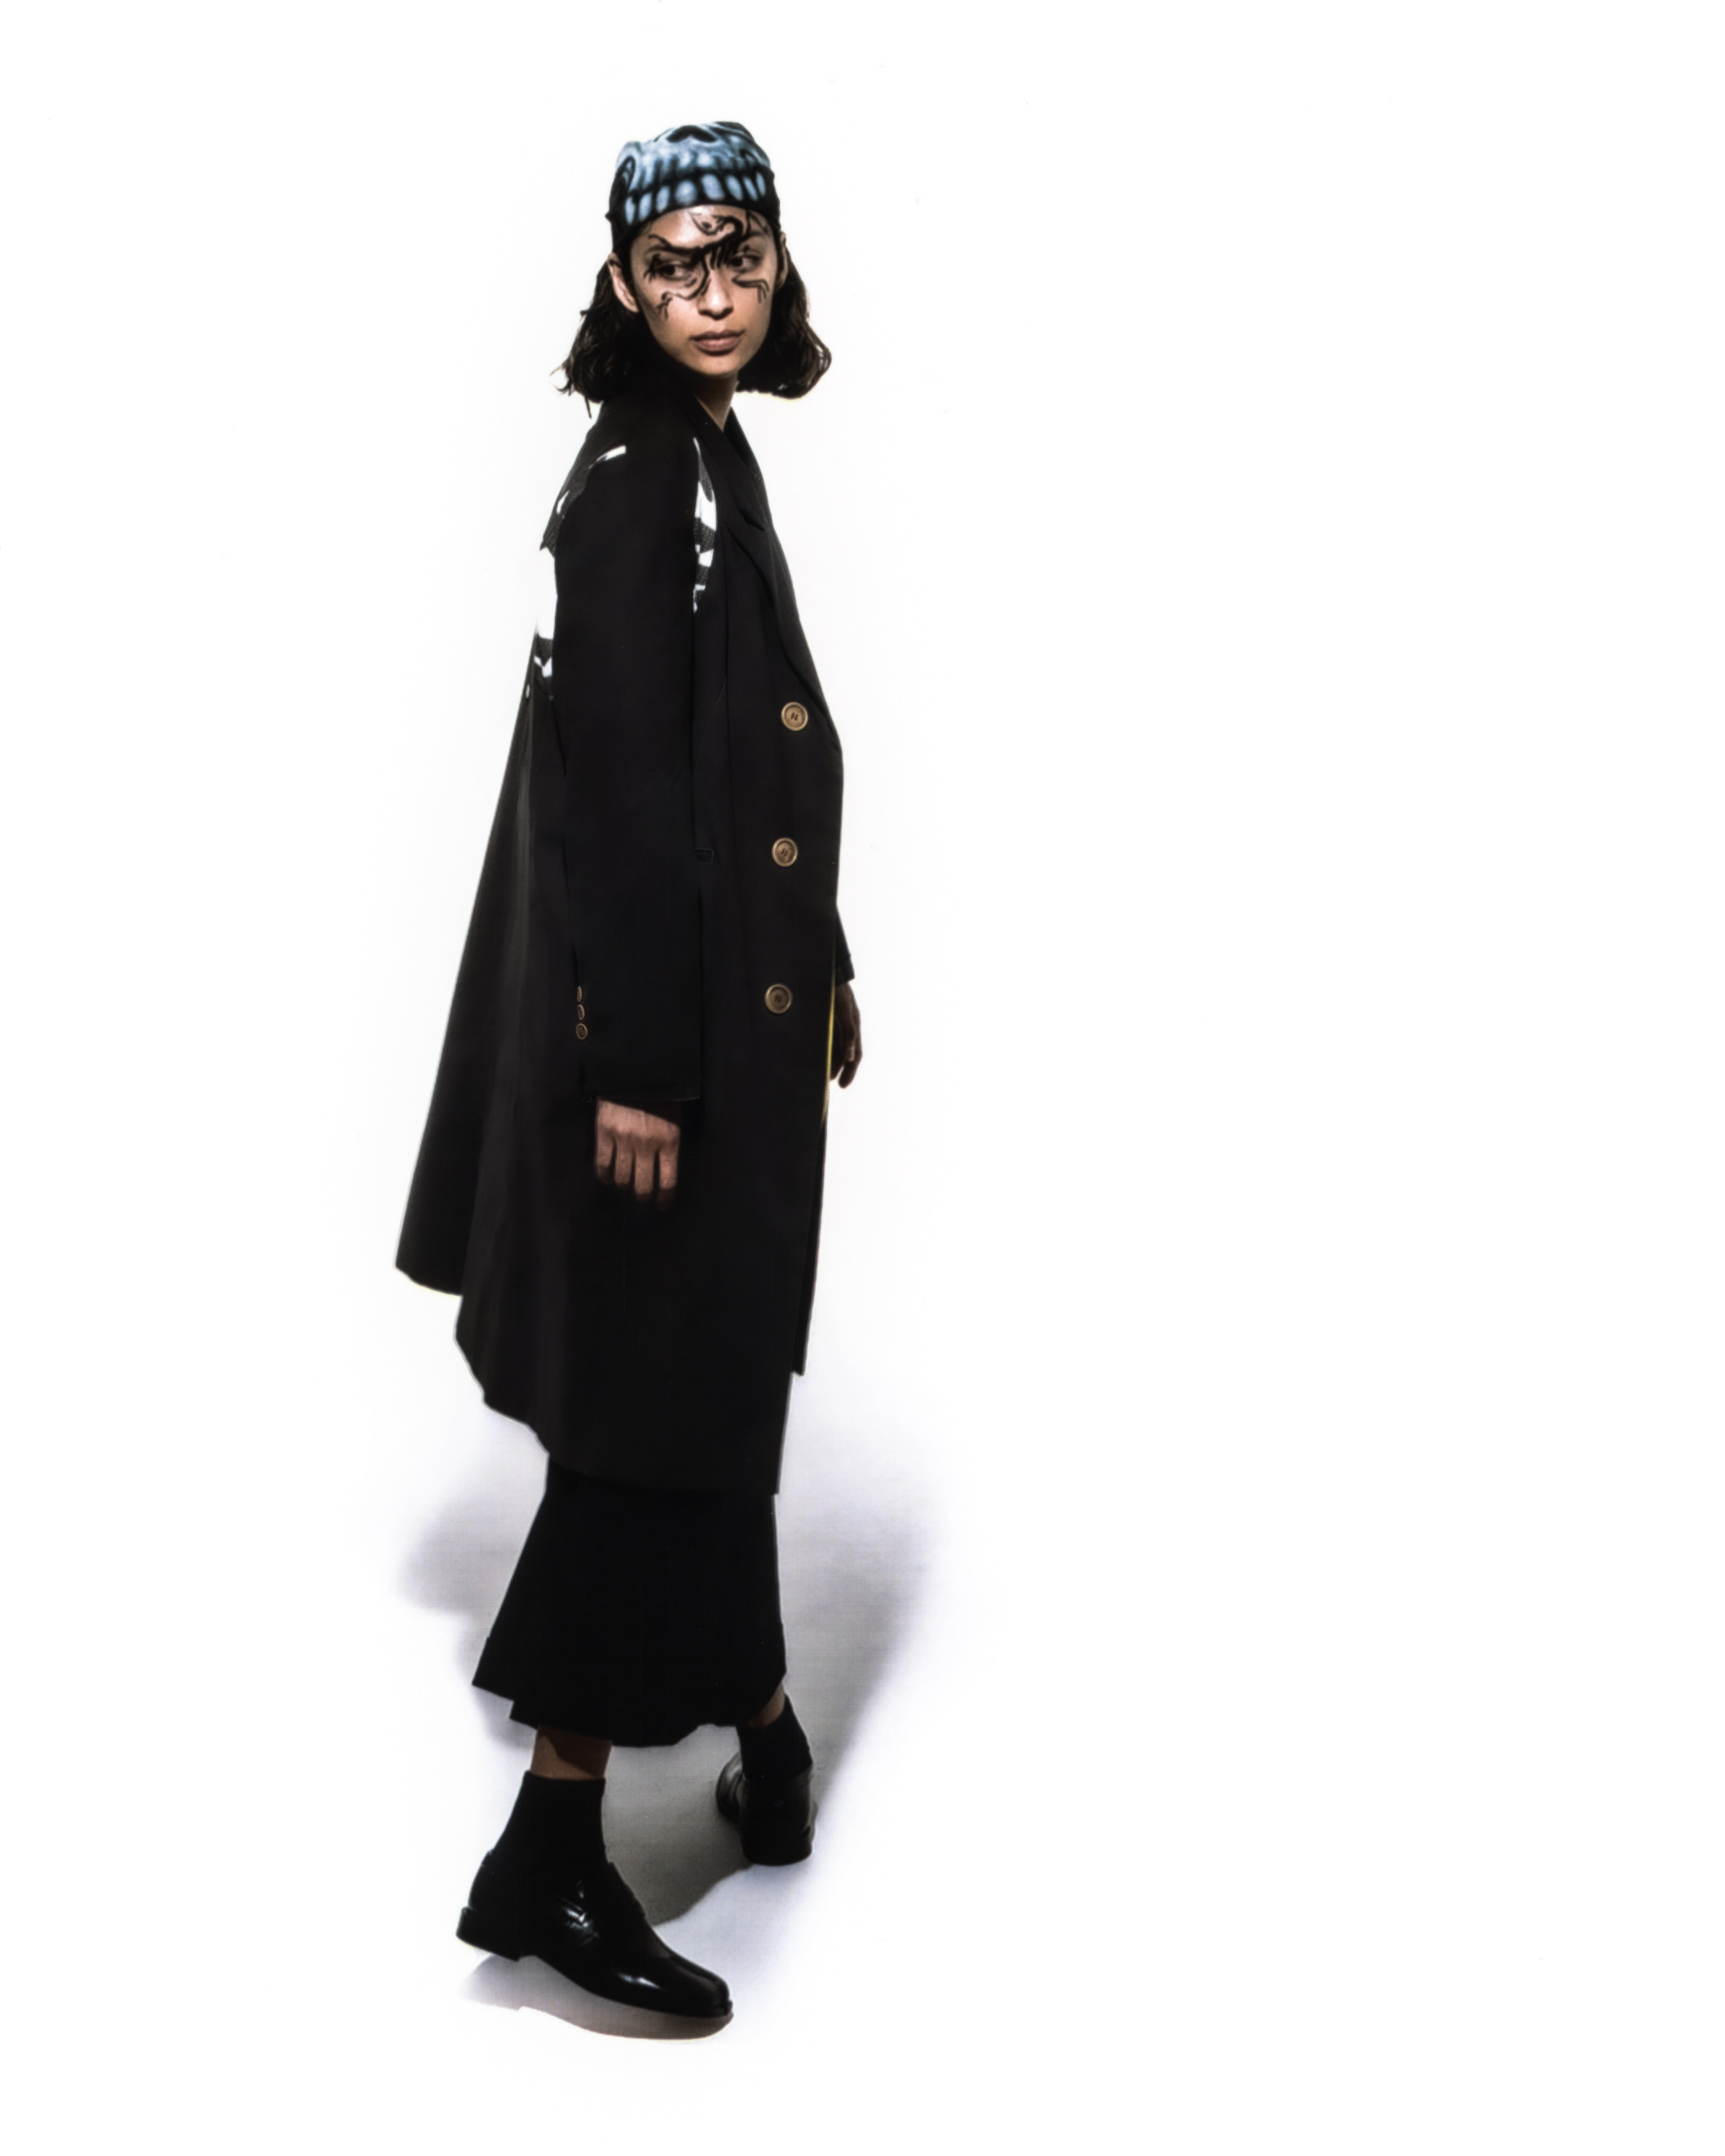 Model wearing glack graphic liner, a long black coat and bandana against a white background